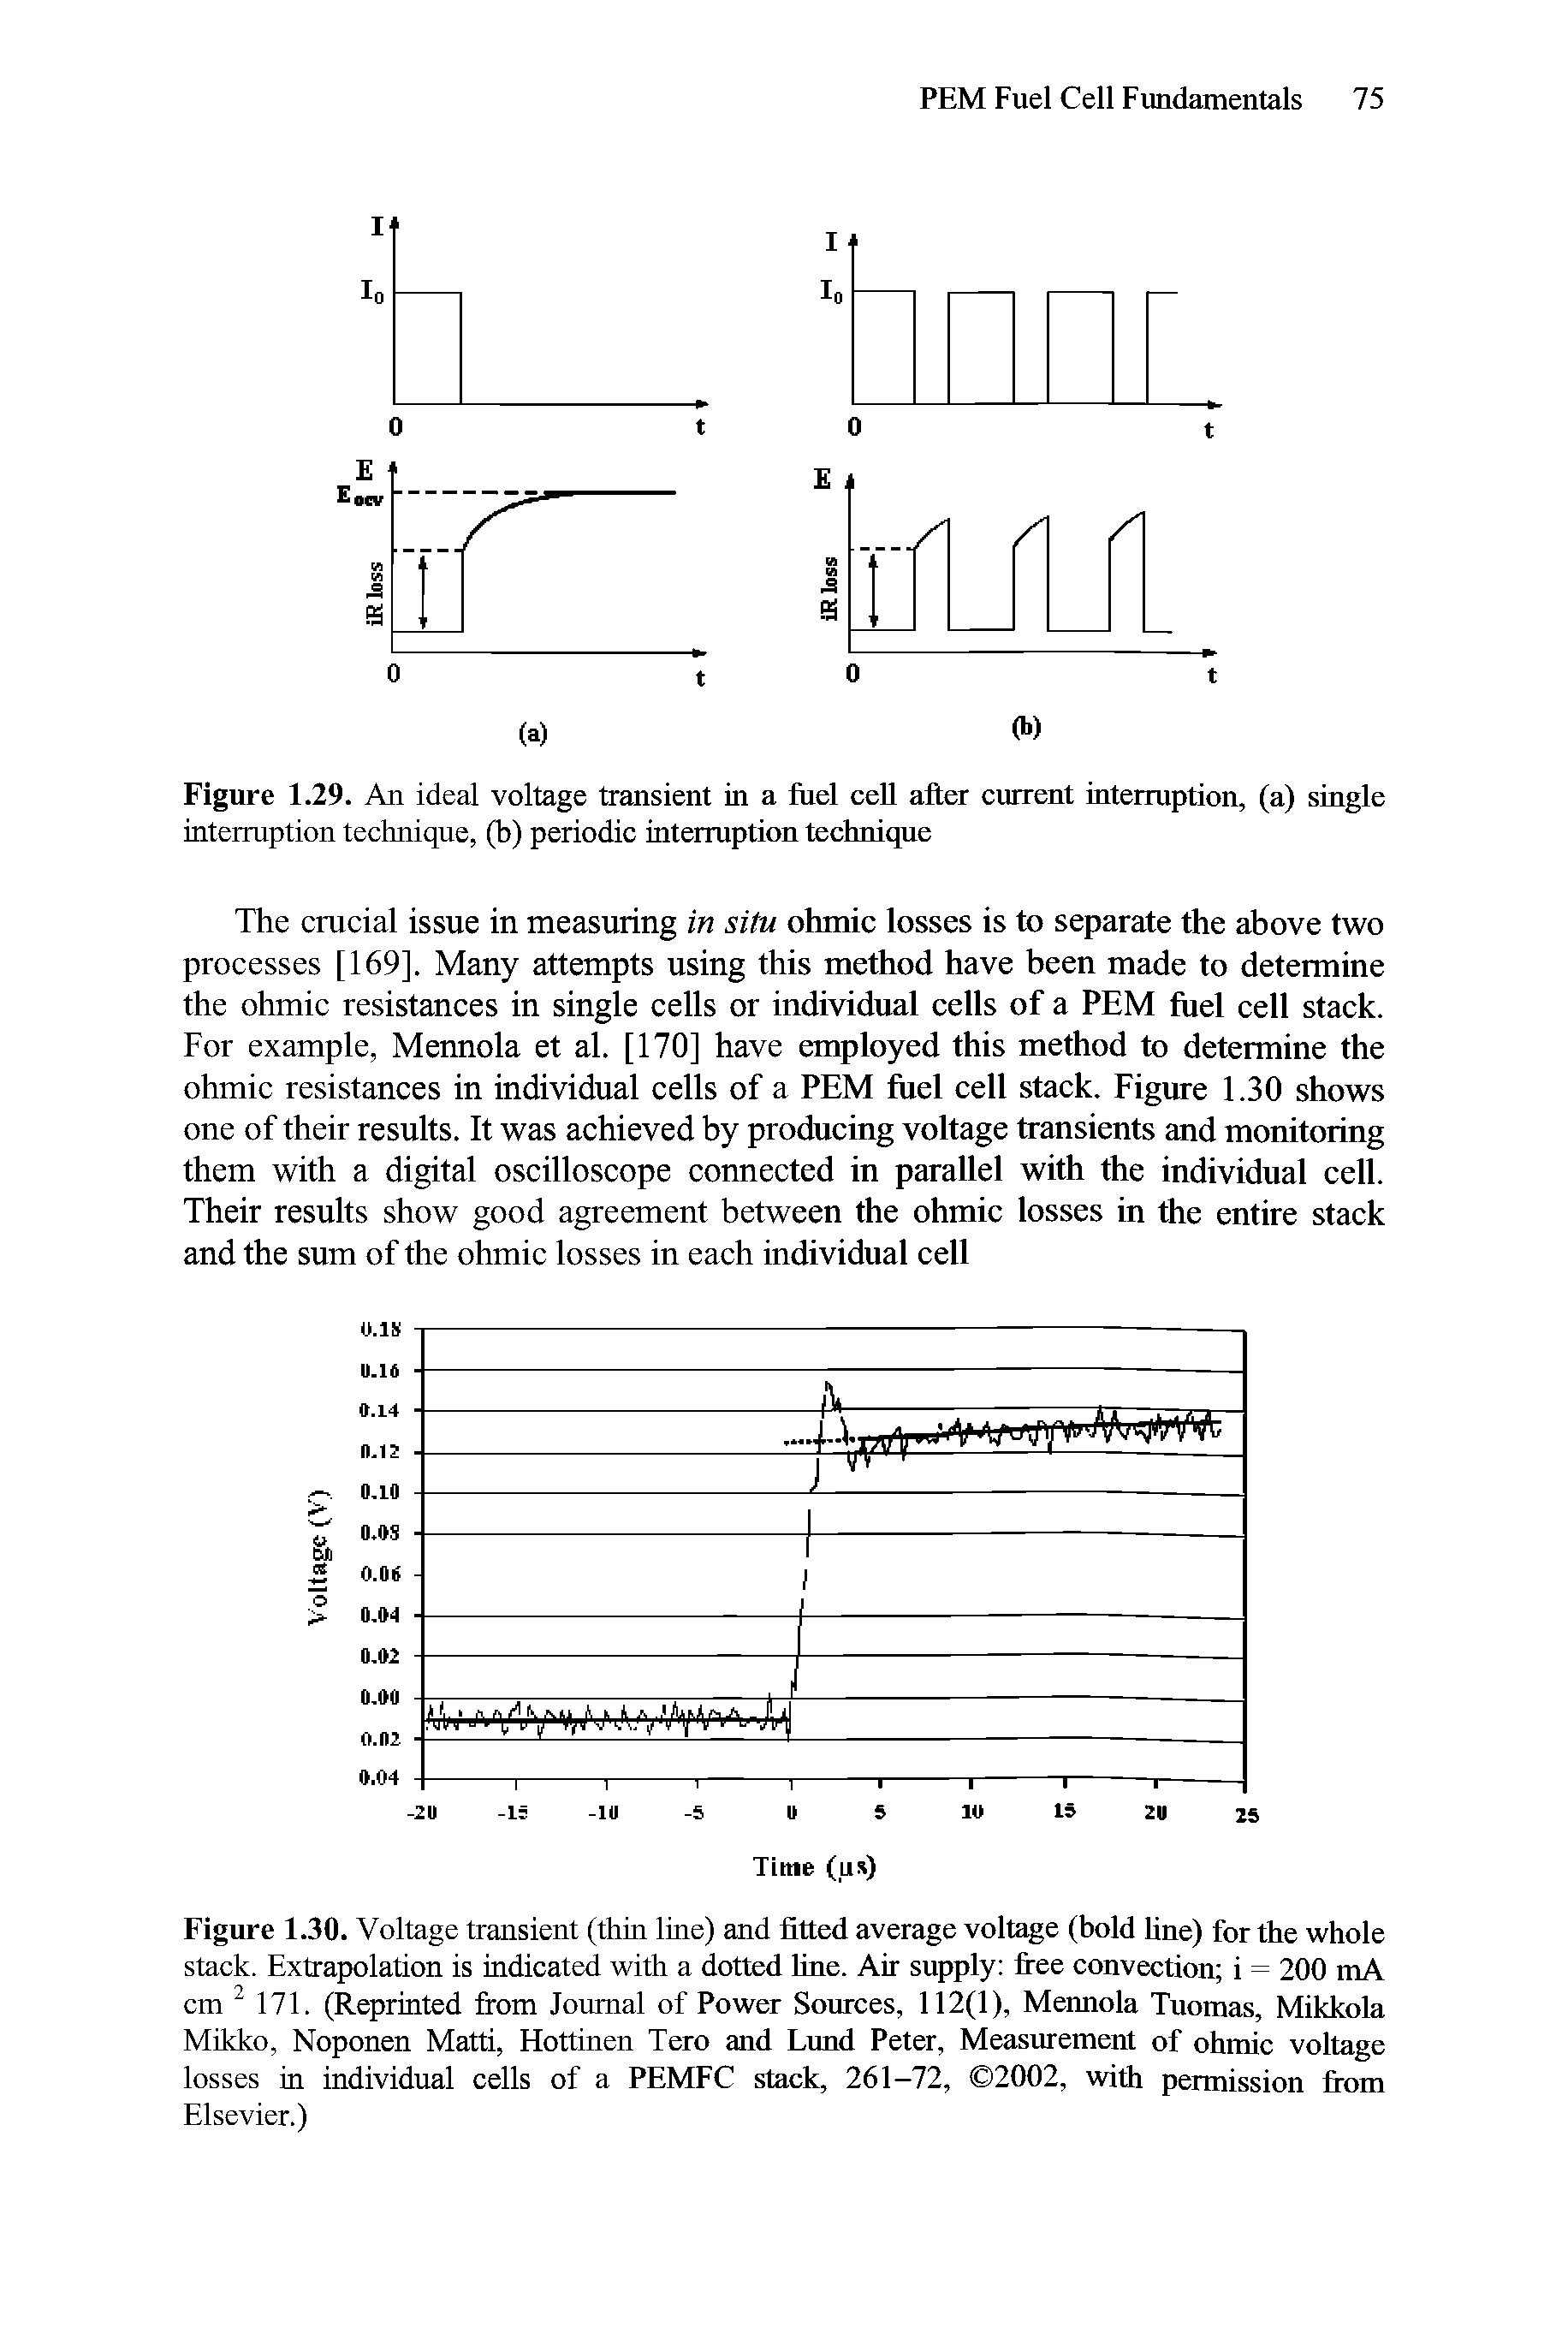 Figure 1.30. Voltage transient (thin line) and fitted average voltage (bold hue) for the whole stack. Extrapolation is indicated with a dotted hne. Air supply free convection i = 200 mA cm 171. (Reprinted from Journal of Power Sources, 112(1), Mennola Tuomas, Mikkola Mikko, Noponen Matti, Hottinen Tero and Lund Peter, Measurement of ohmic voltage losses in individual cells of a PEMFC stack, 261-72, 2002, with permission from Elsevier.)...